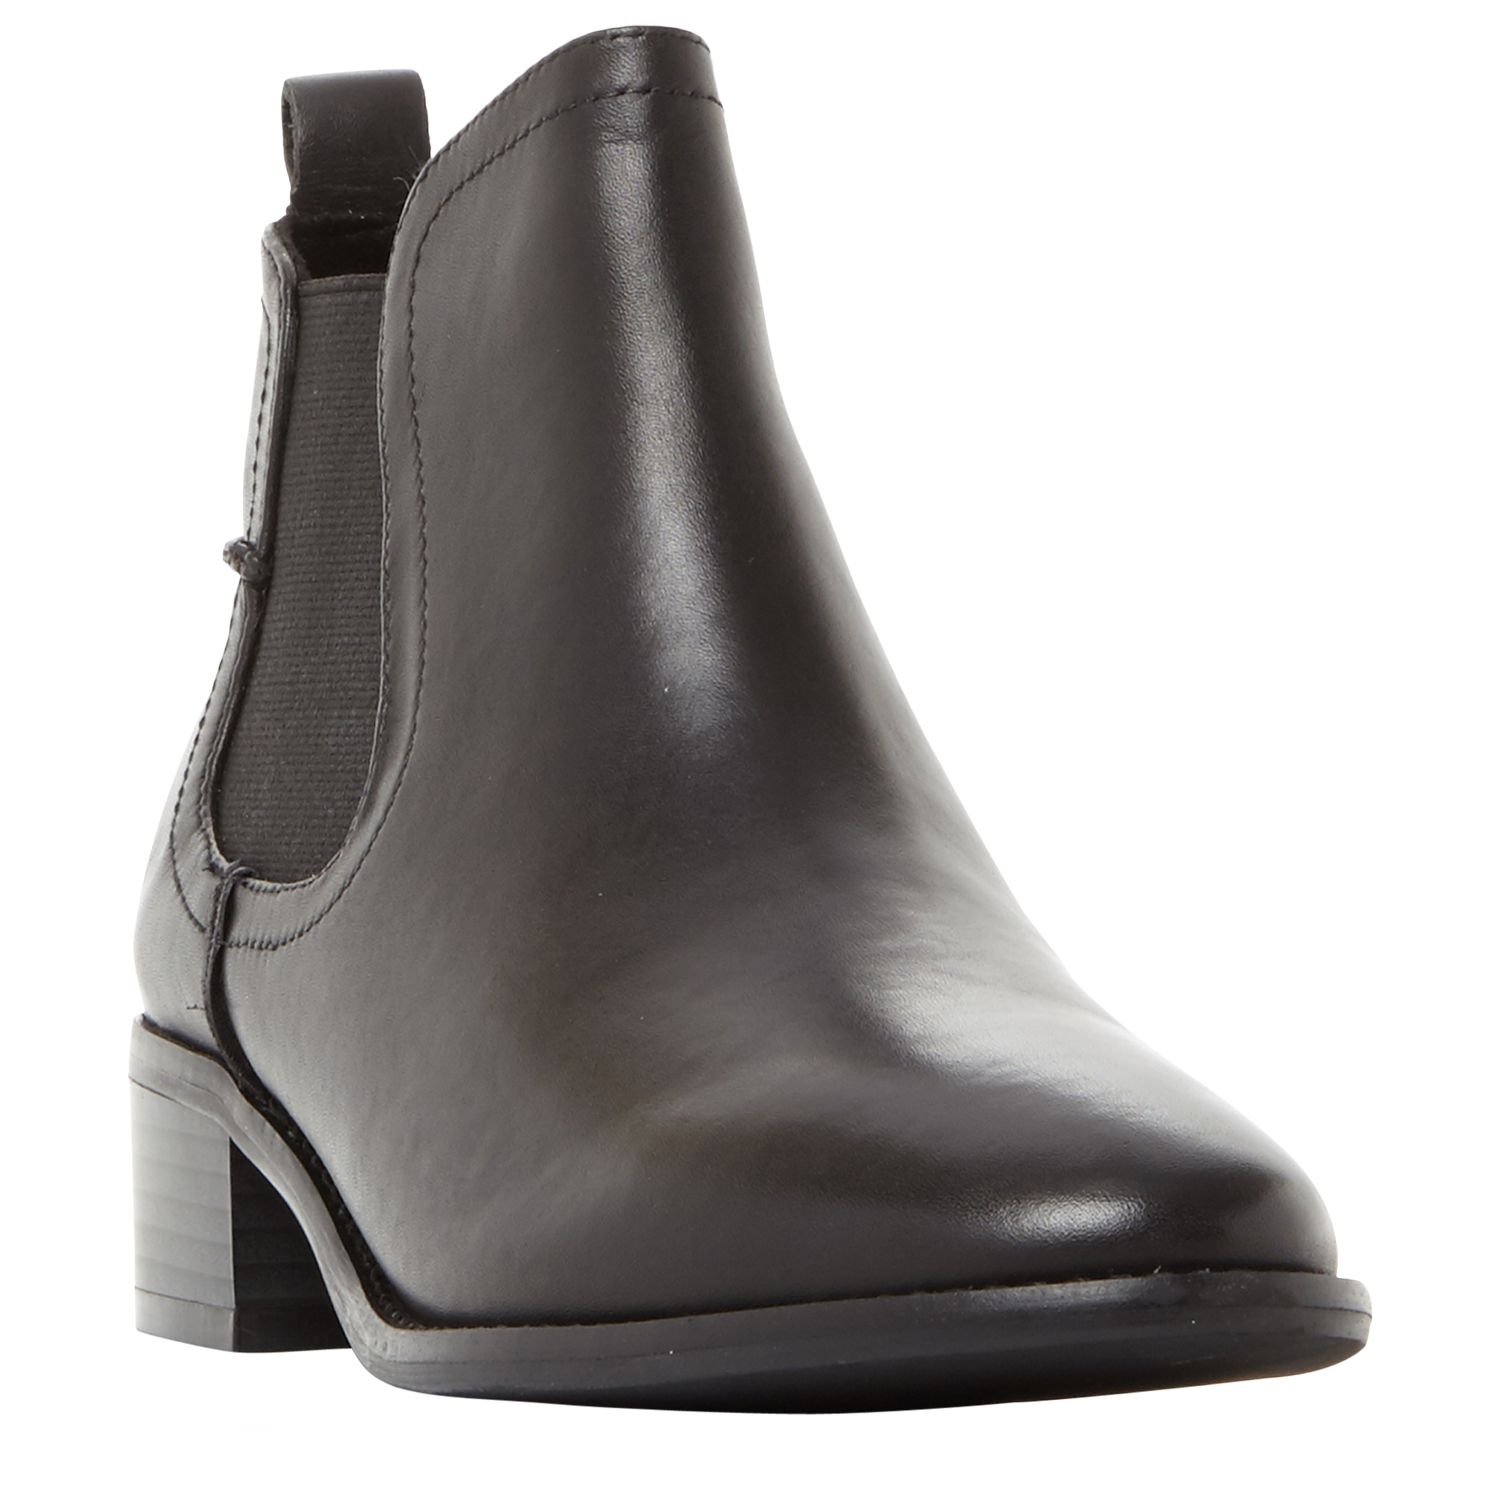 Steve Madden Dicey Ankle Chelsea Boots, Black Leather